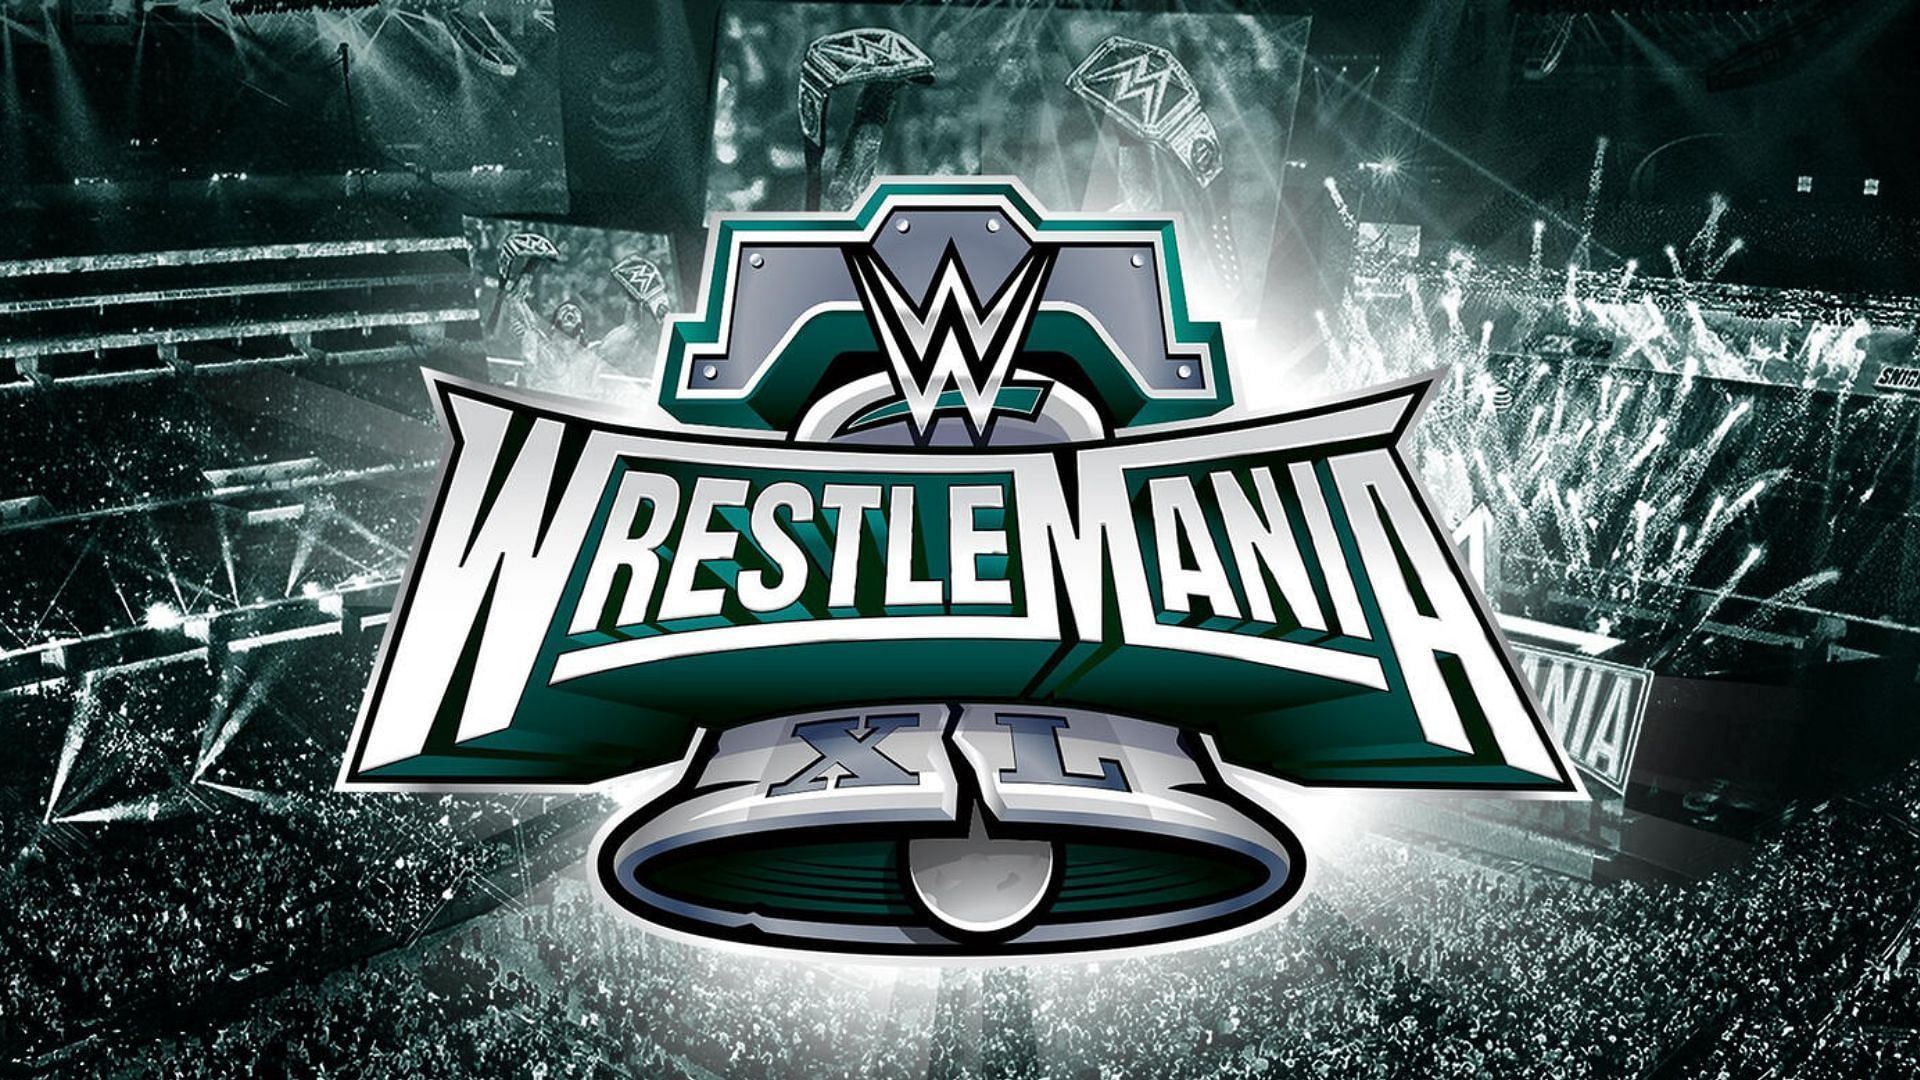 WrestleMania XL will take place this weekend.